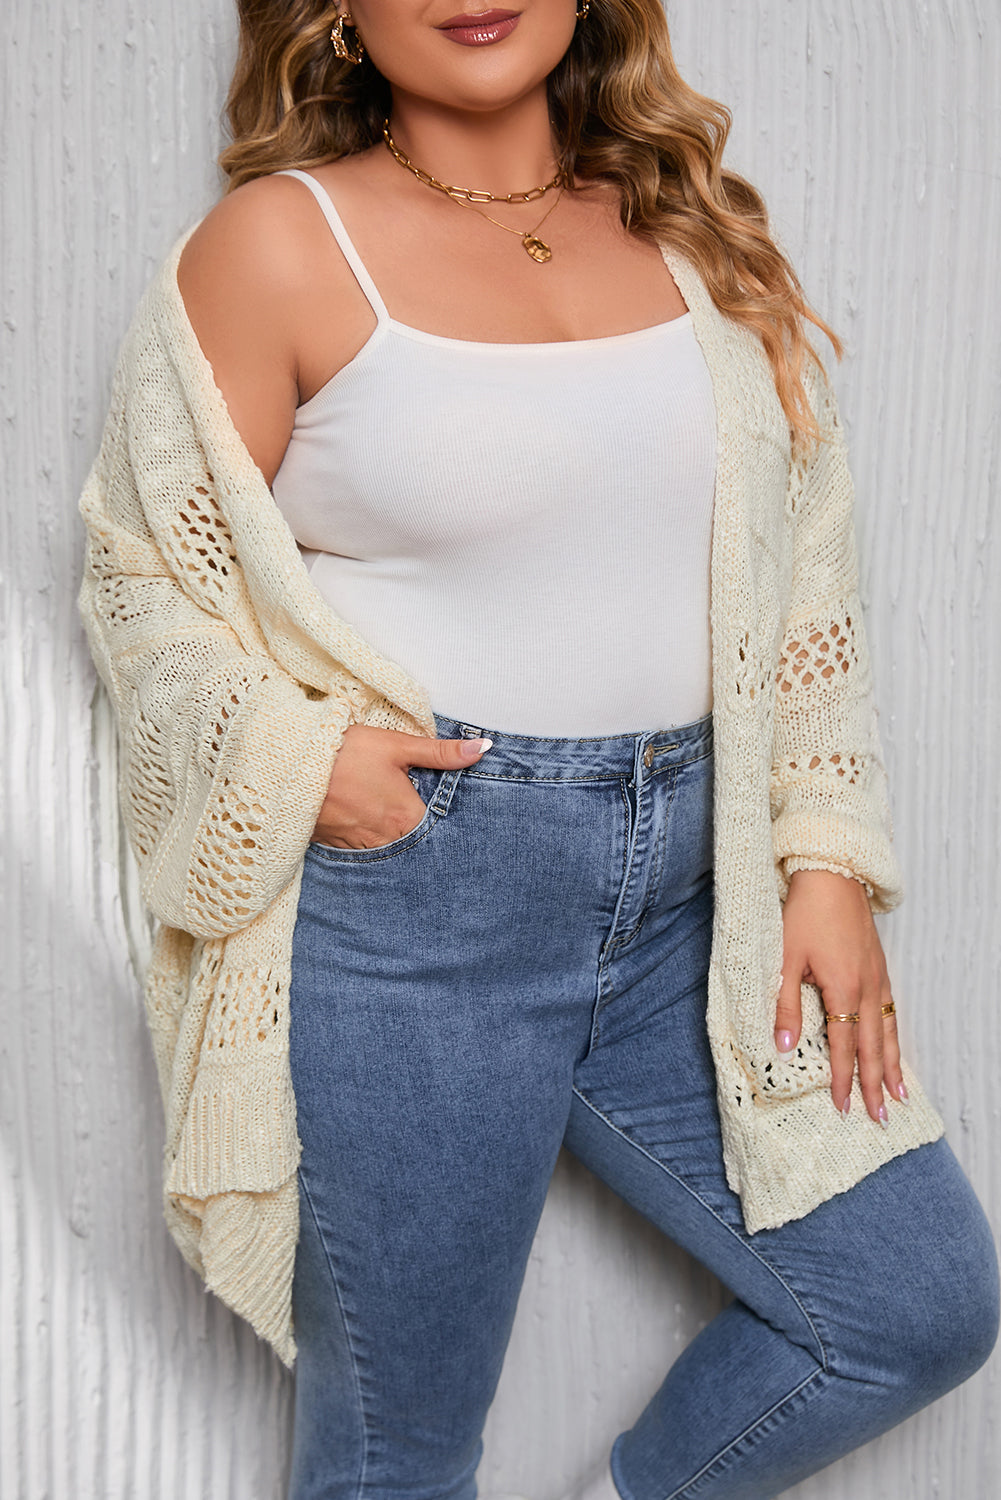 Marelica Plus Size Slouchy Hollowed Knit Open Front Cardigan